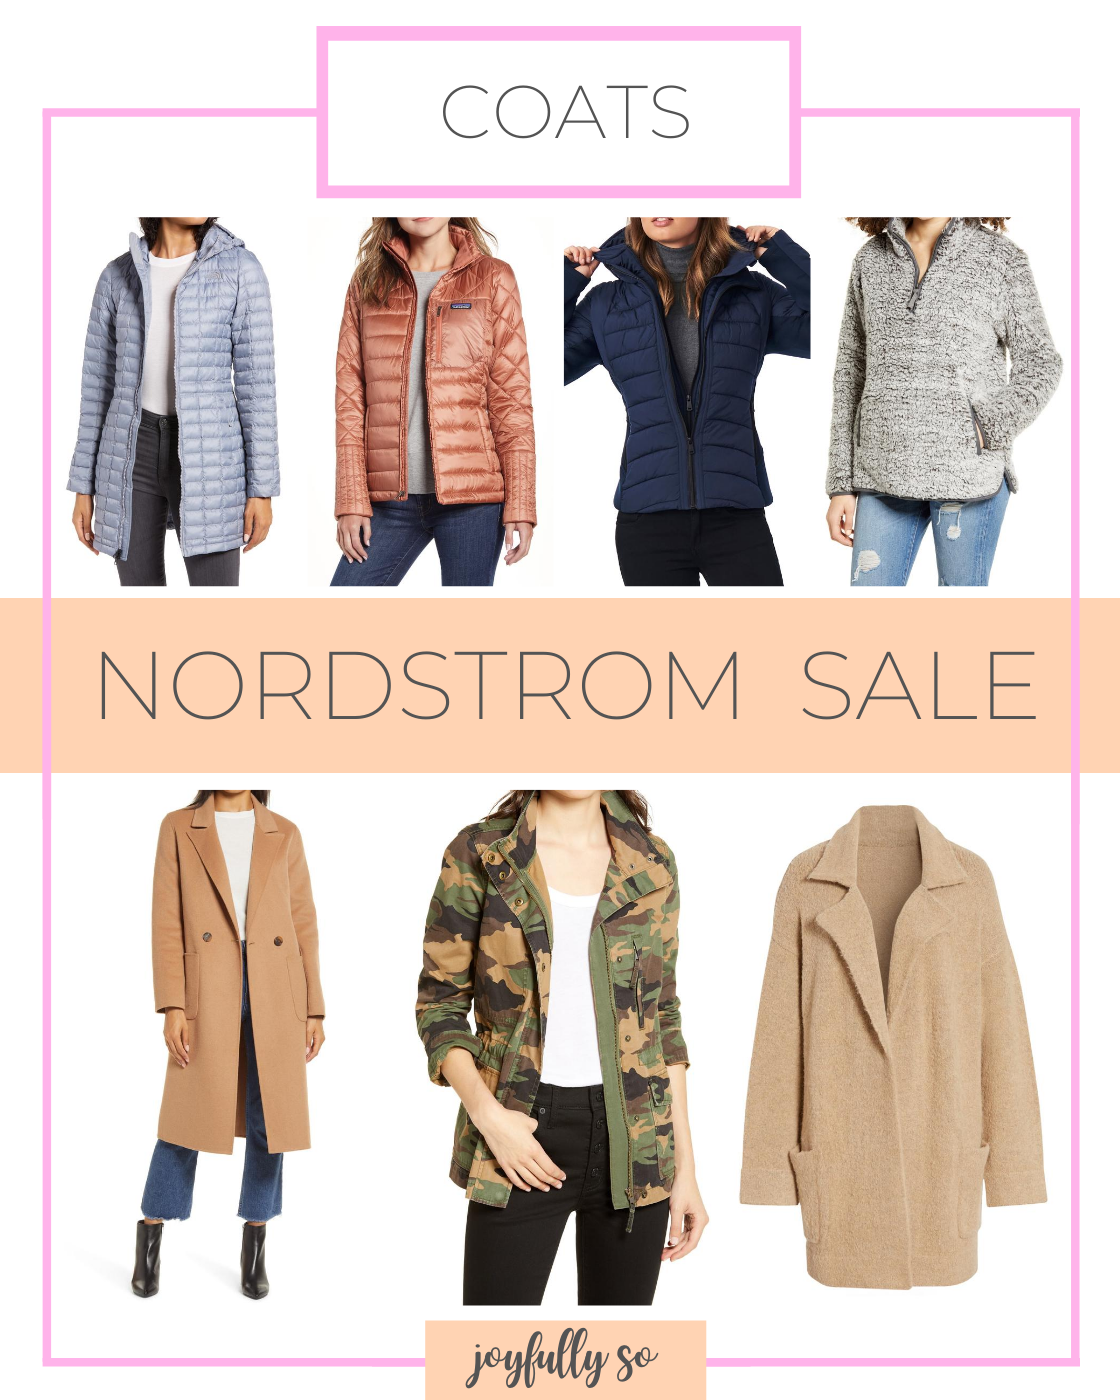 Favorite coats and jackets! To celebrate the NSale and the new website layout on Joyfully So, there is a Tory Burch giveaway! Let’s get to the Women’s Nordstrom Anniversary Sale 2020 Shopping Guide!